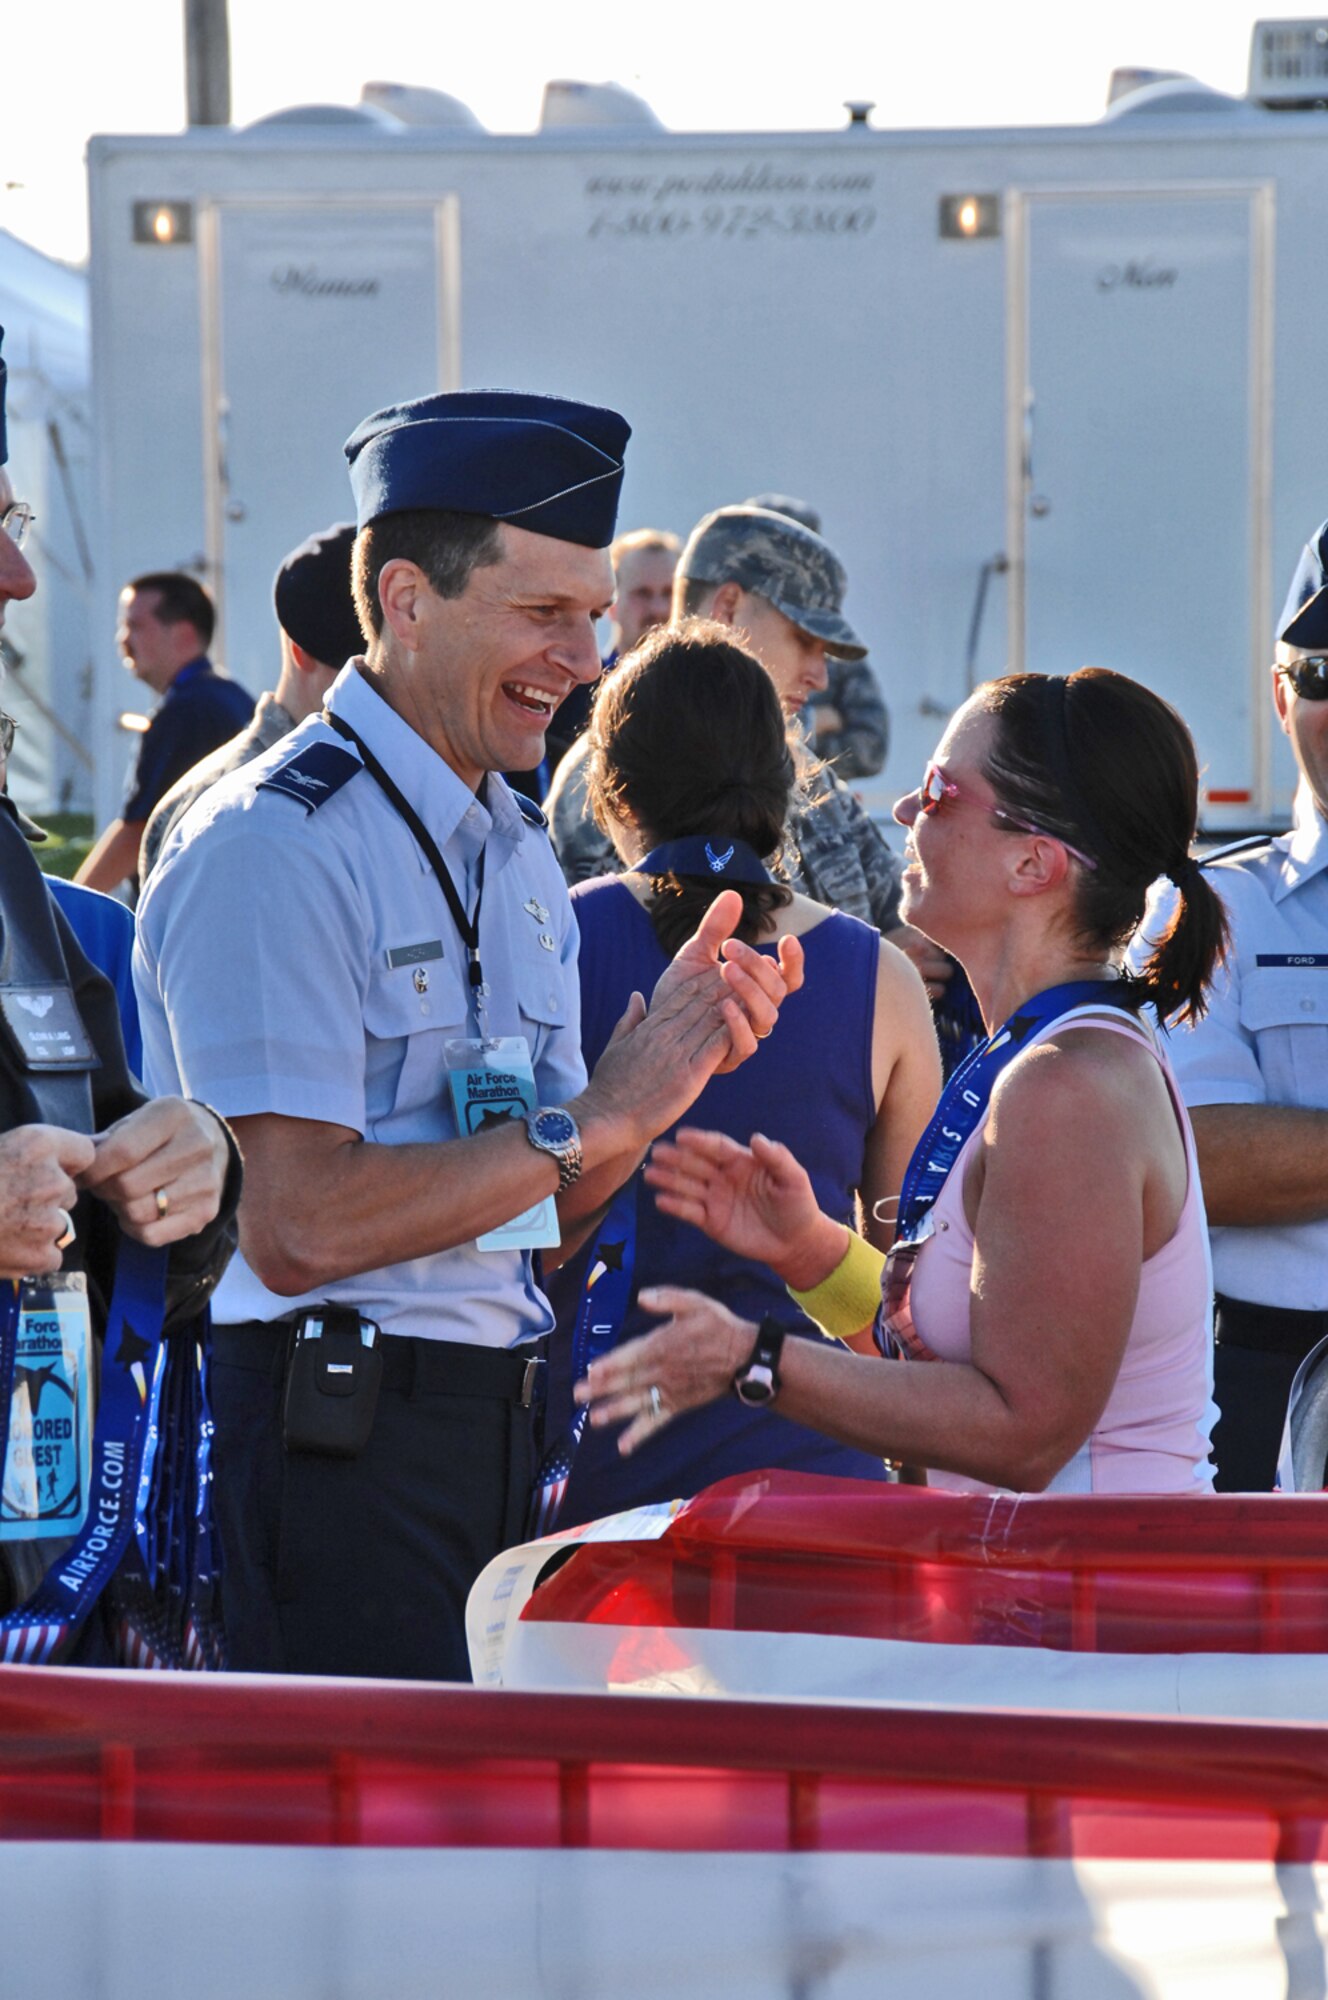 Col. Richard "Duke" Hazdra congratulates a runner at the finish line for the U.S. Air Force Marathon Sept. 19 at Wright-Patterson Air Force Base, Ohio. A record 9,969 runners participated in events which included 5K and 10K races, a half marathon and full marathon. Col. Hazdra is 88th Air Base Wing vice commander.  (Air Force photo/Ben Strasser)